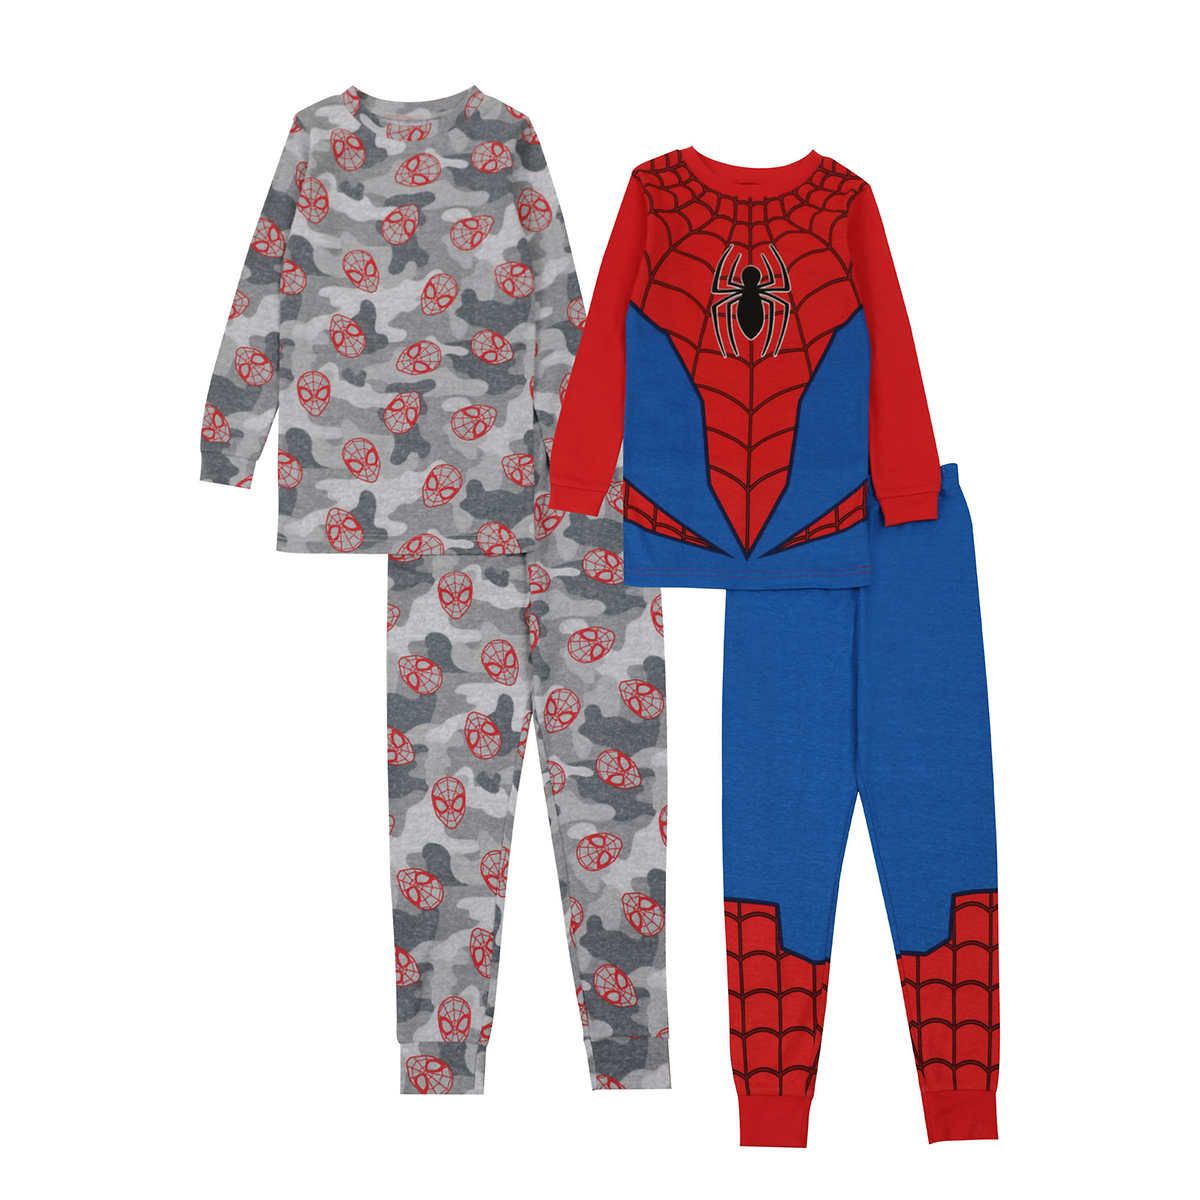 Lamb Patch Long Sleeve Pajama Sets for 1 to 7 Years Old Kids -  Canada